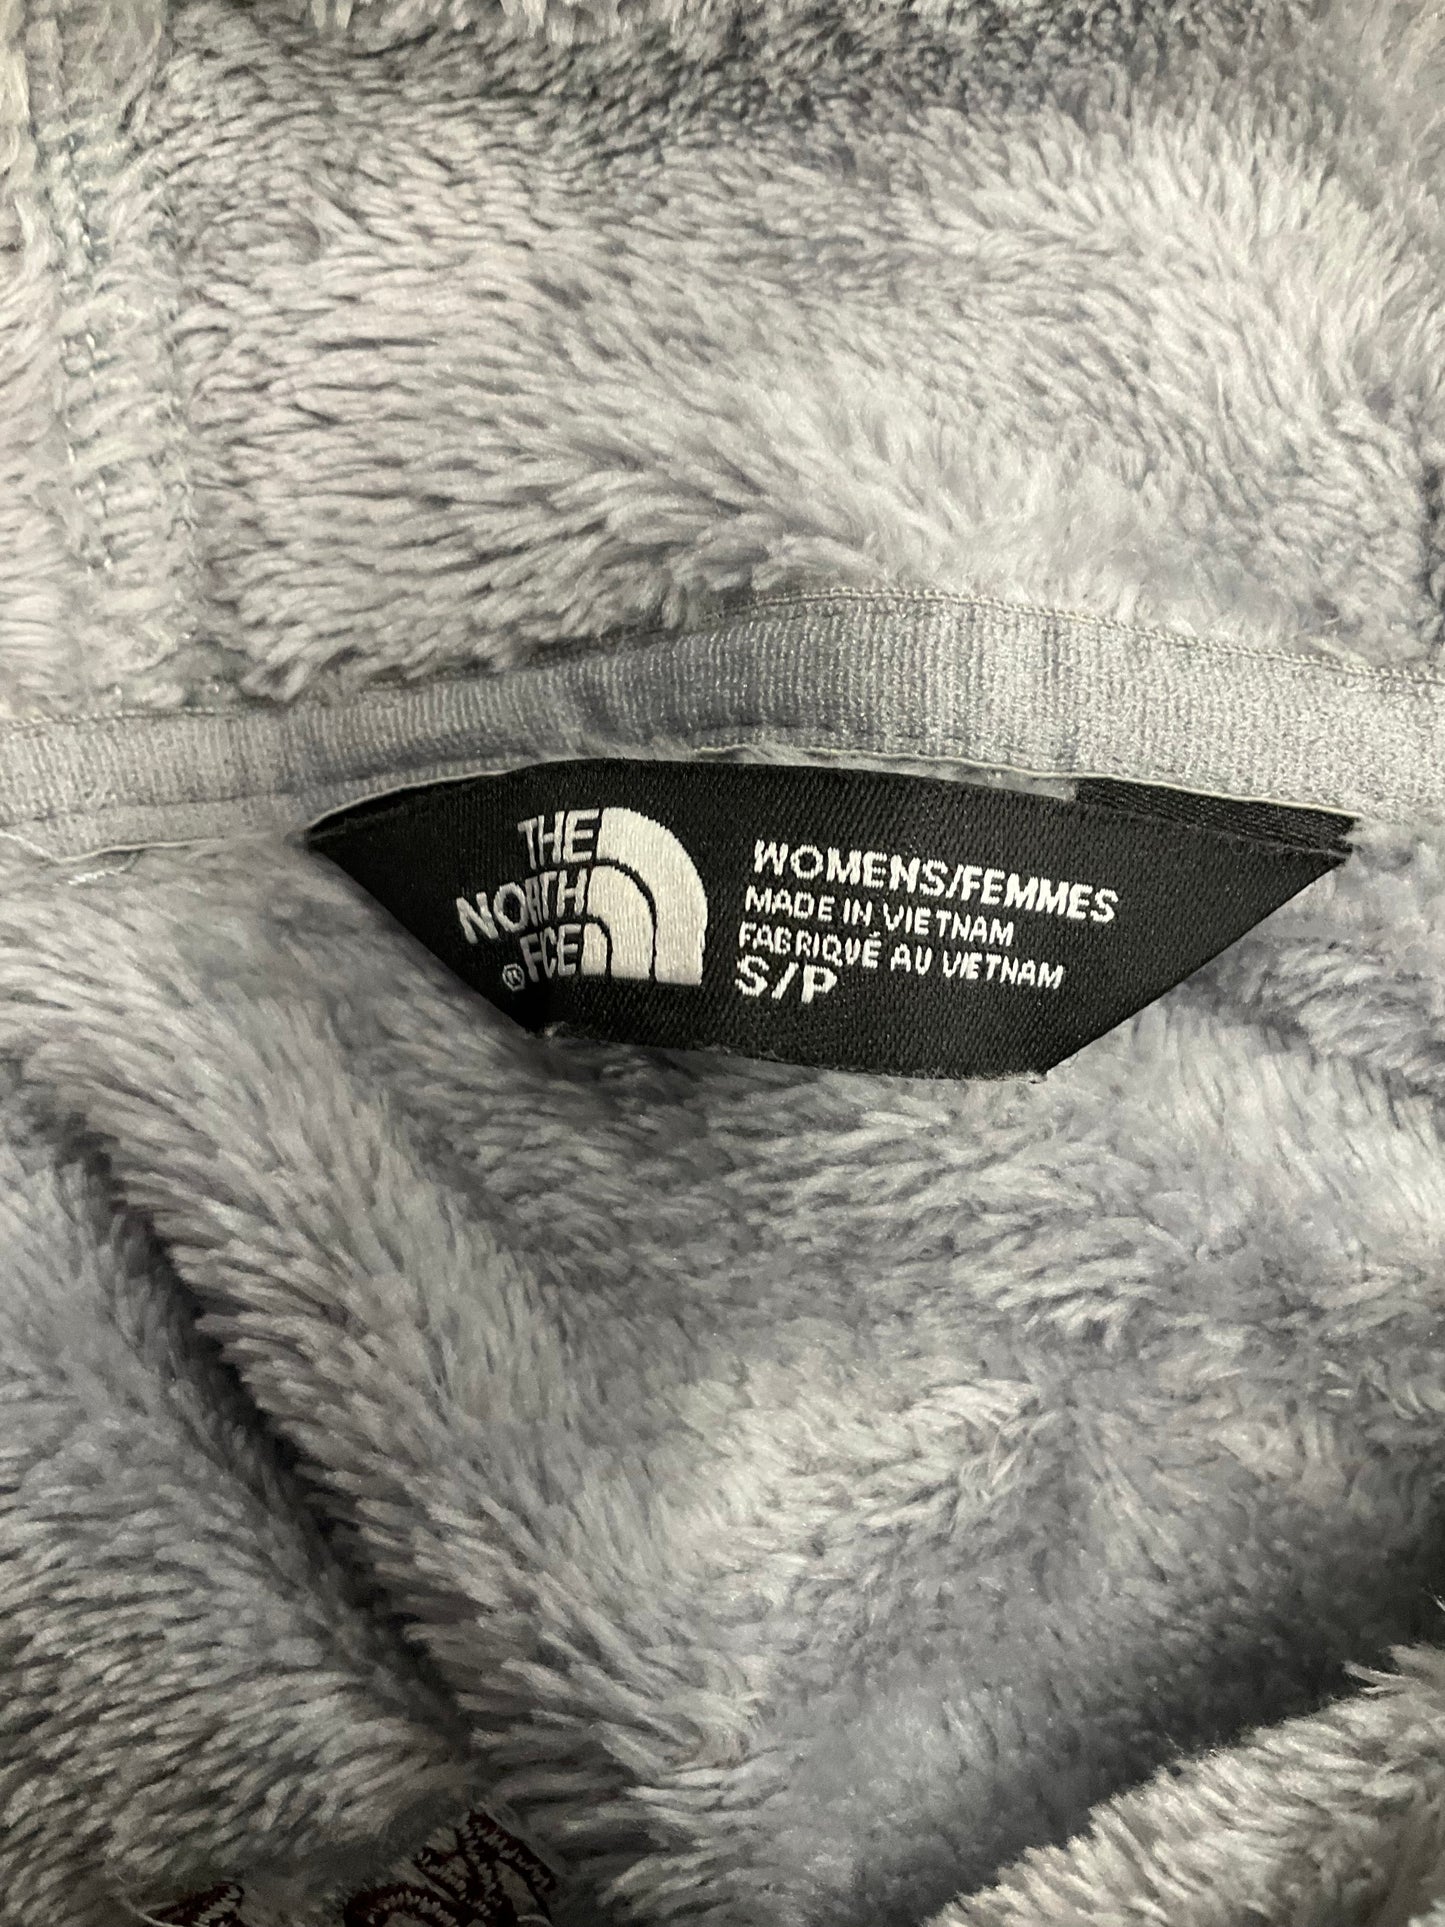 Grey Athletic Top Long Sleeve Hoodie The North Face, Size S